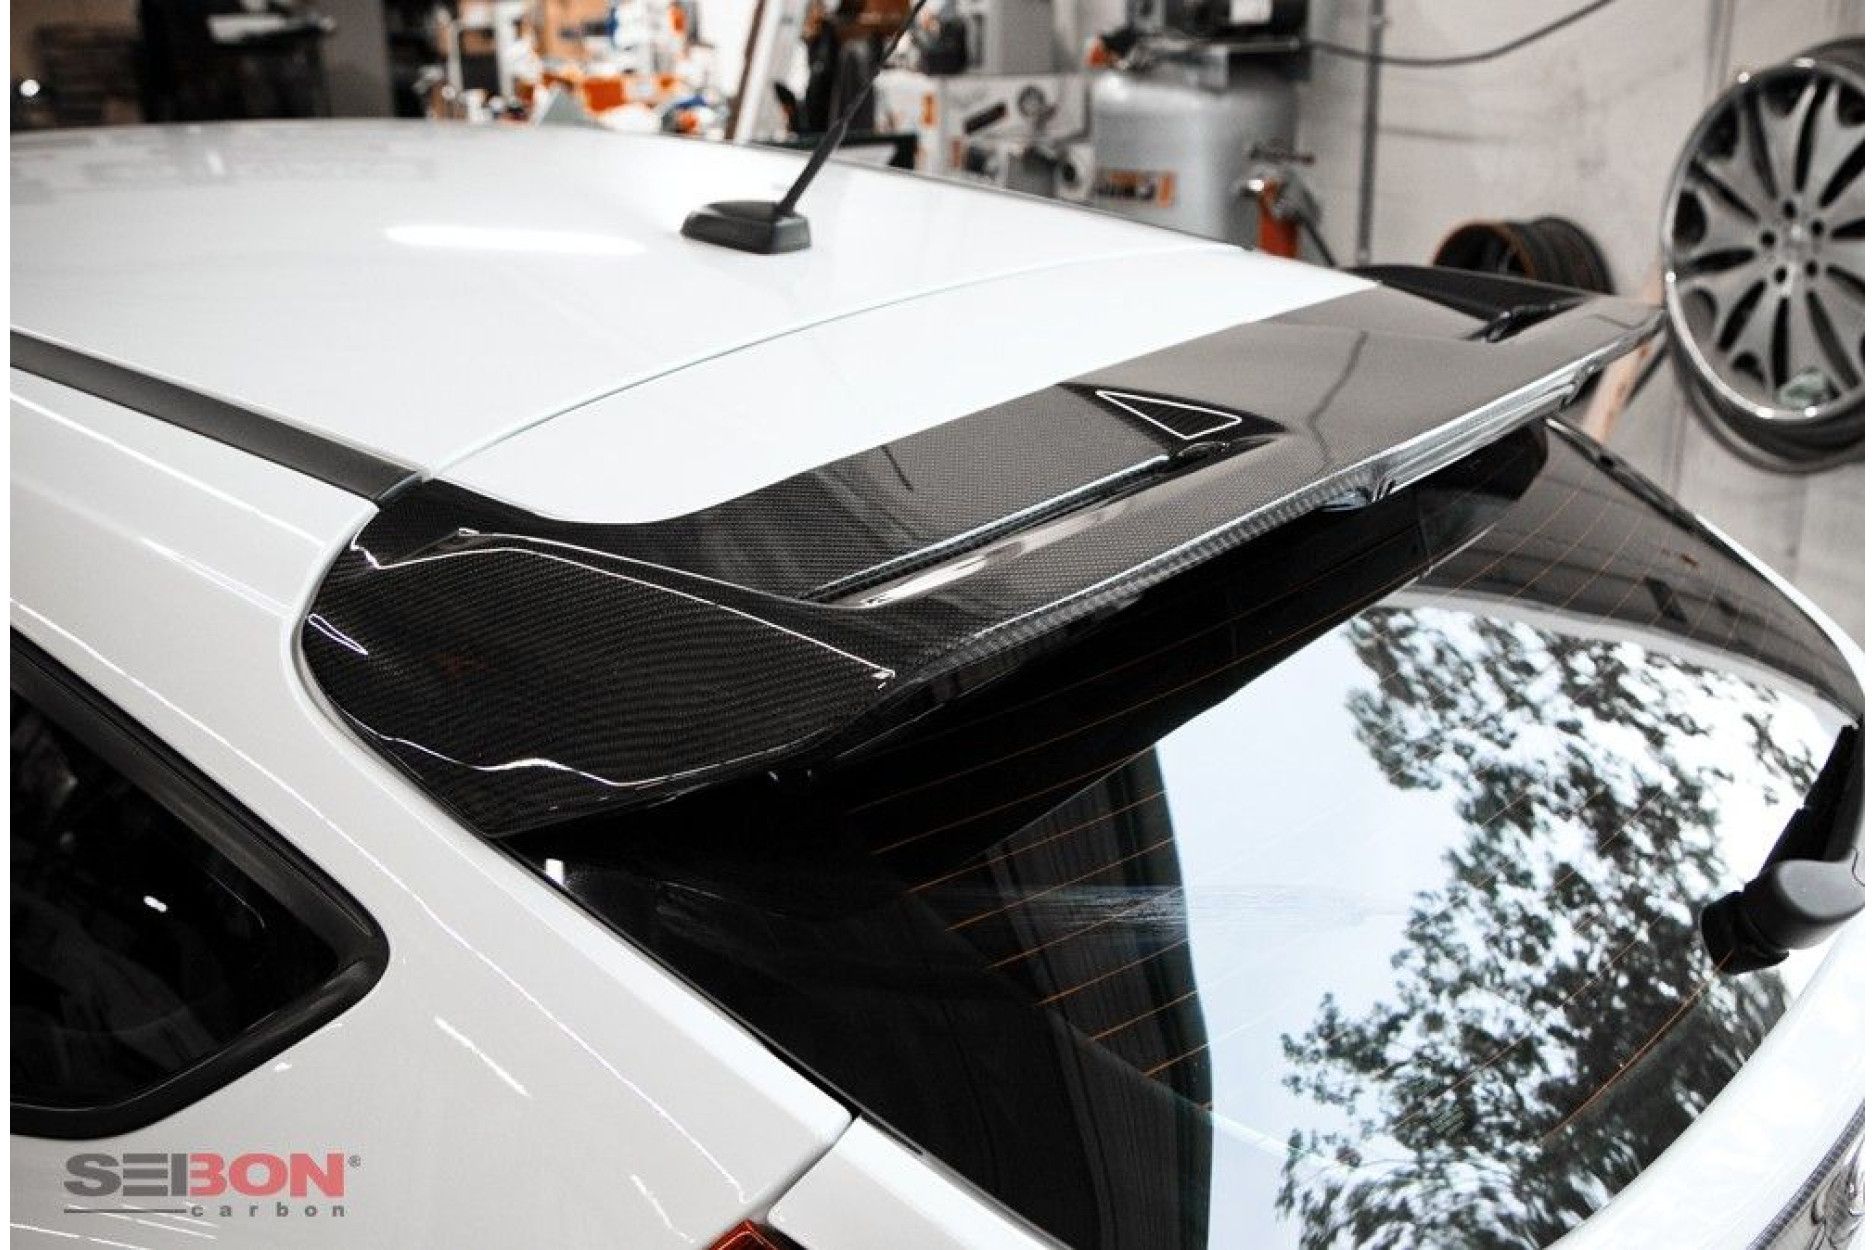 Seibon carbon spoiler fitting forD Focus hatchback 2012 - 2014 OE-Style (4) 